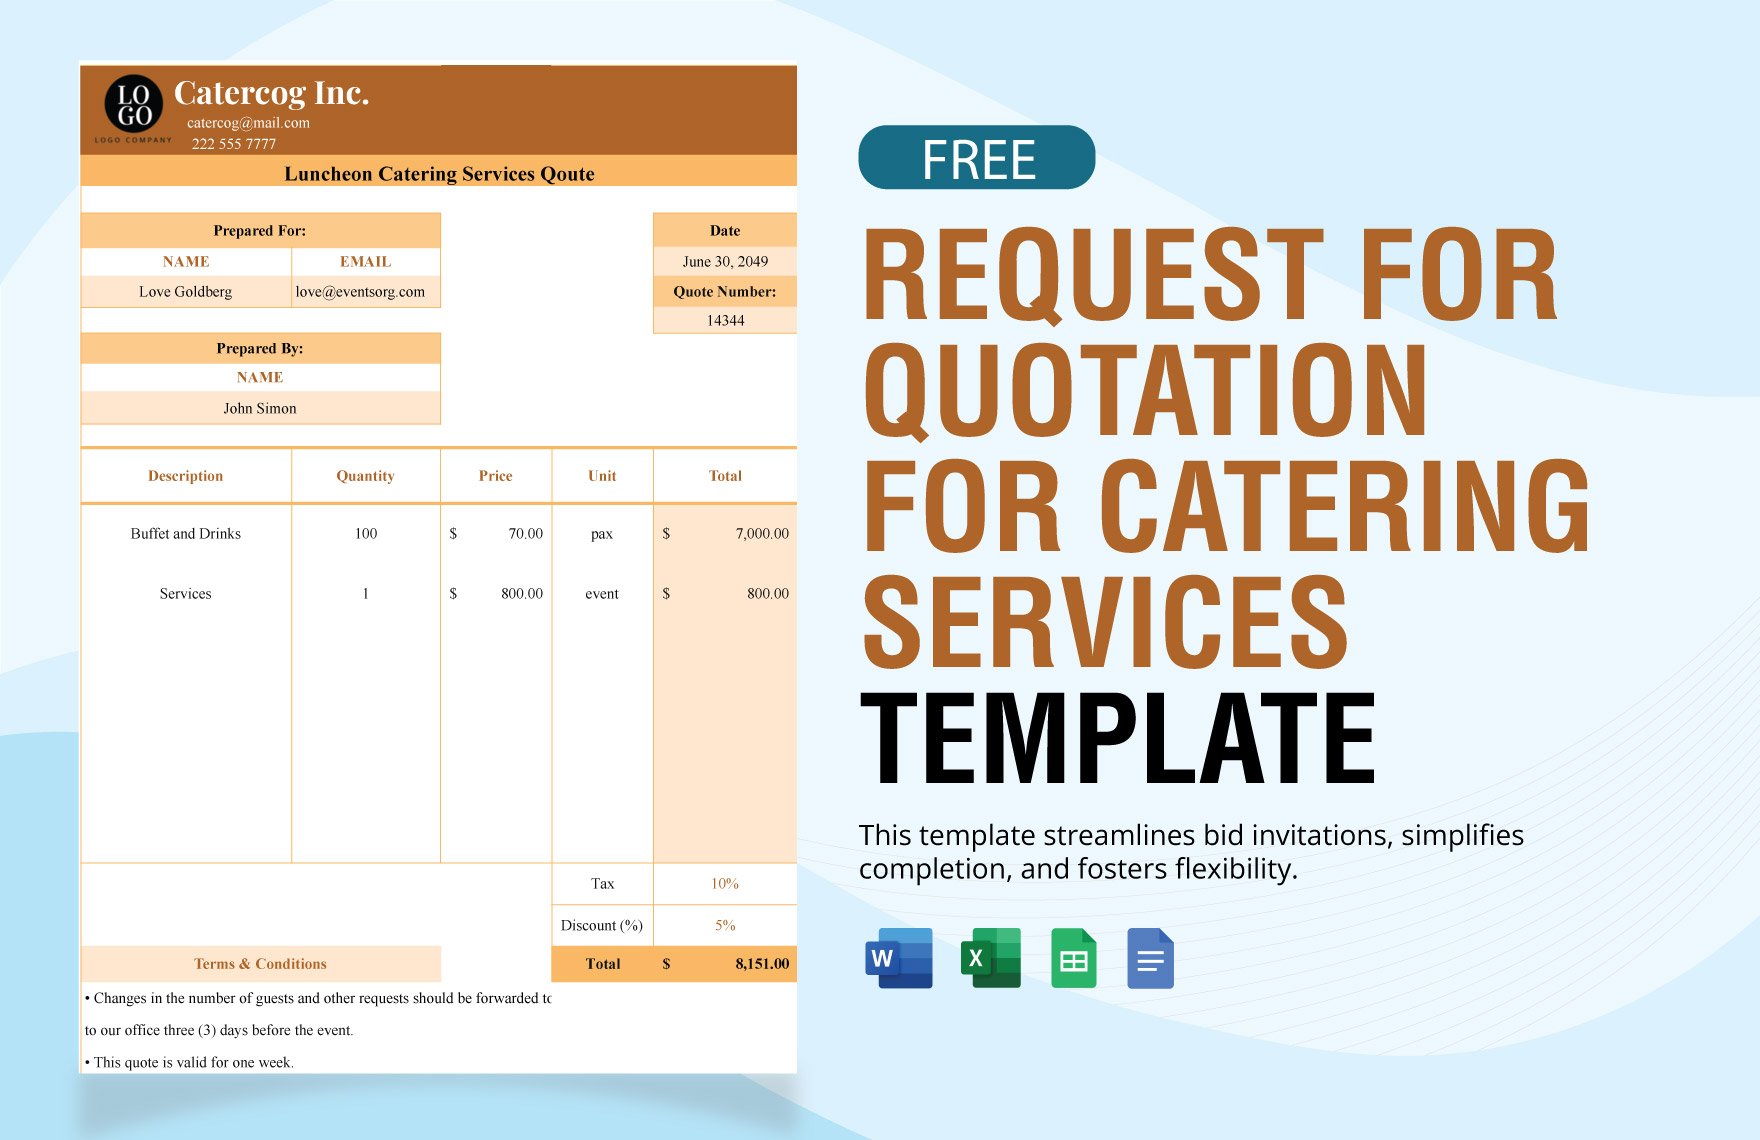 Request for Quotation for Catering Services Template